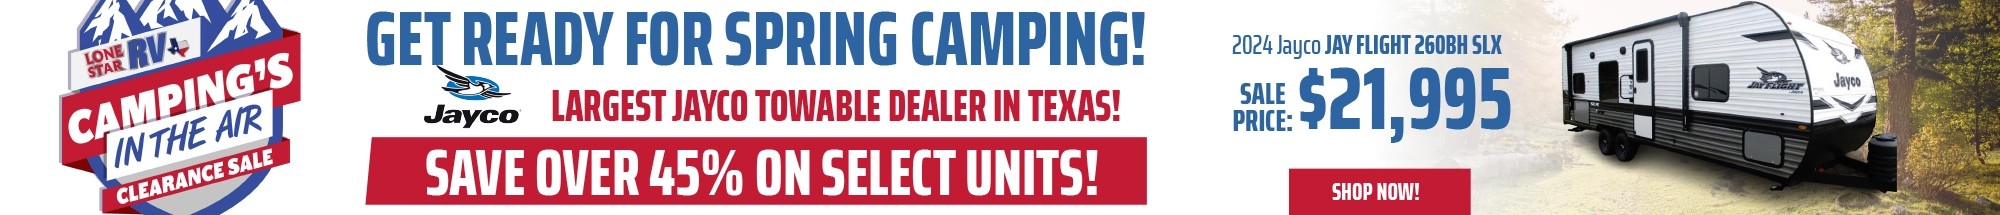 Camping's In The Air Sale at Lone Star RV